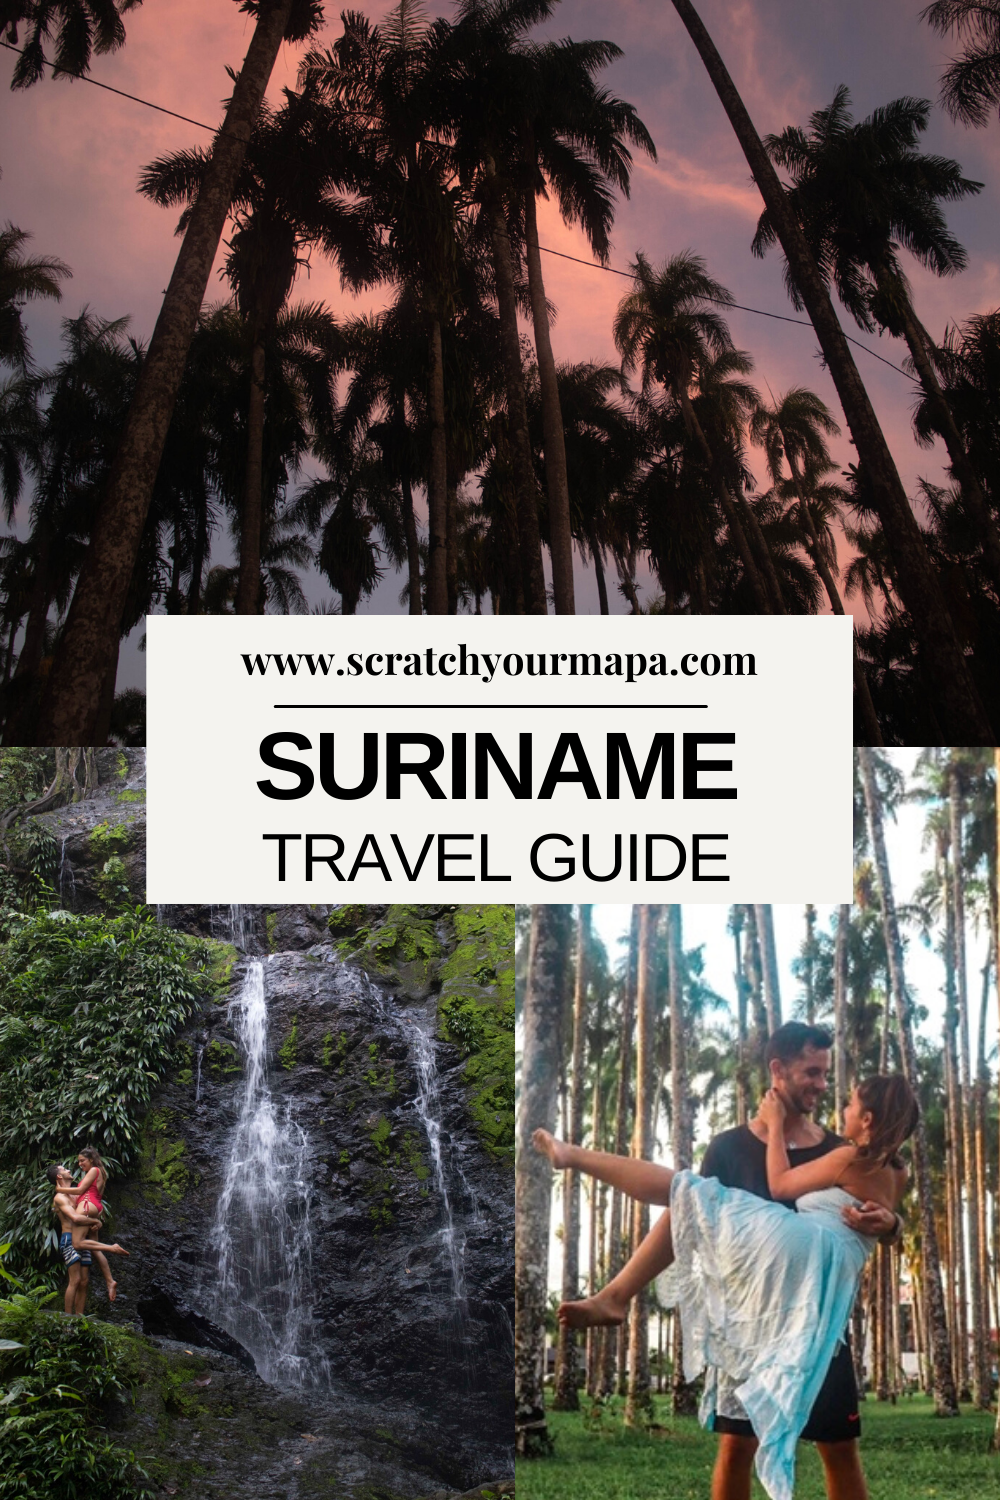 Things to do in Suriname